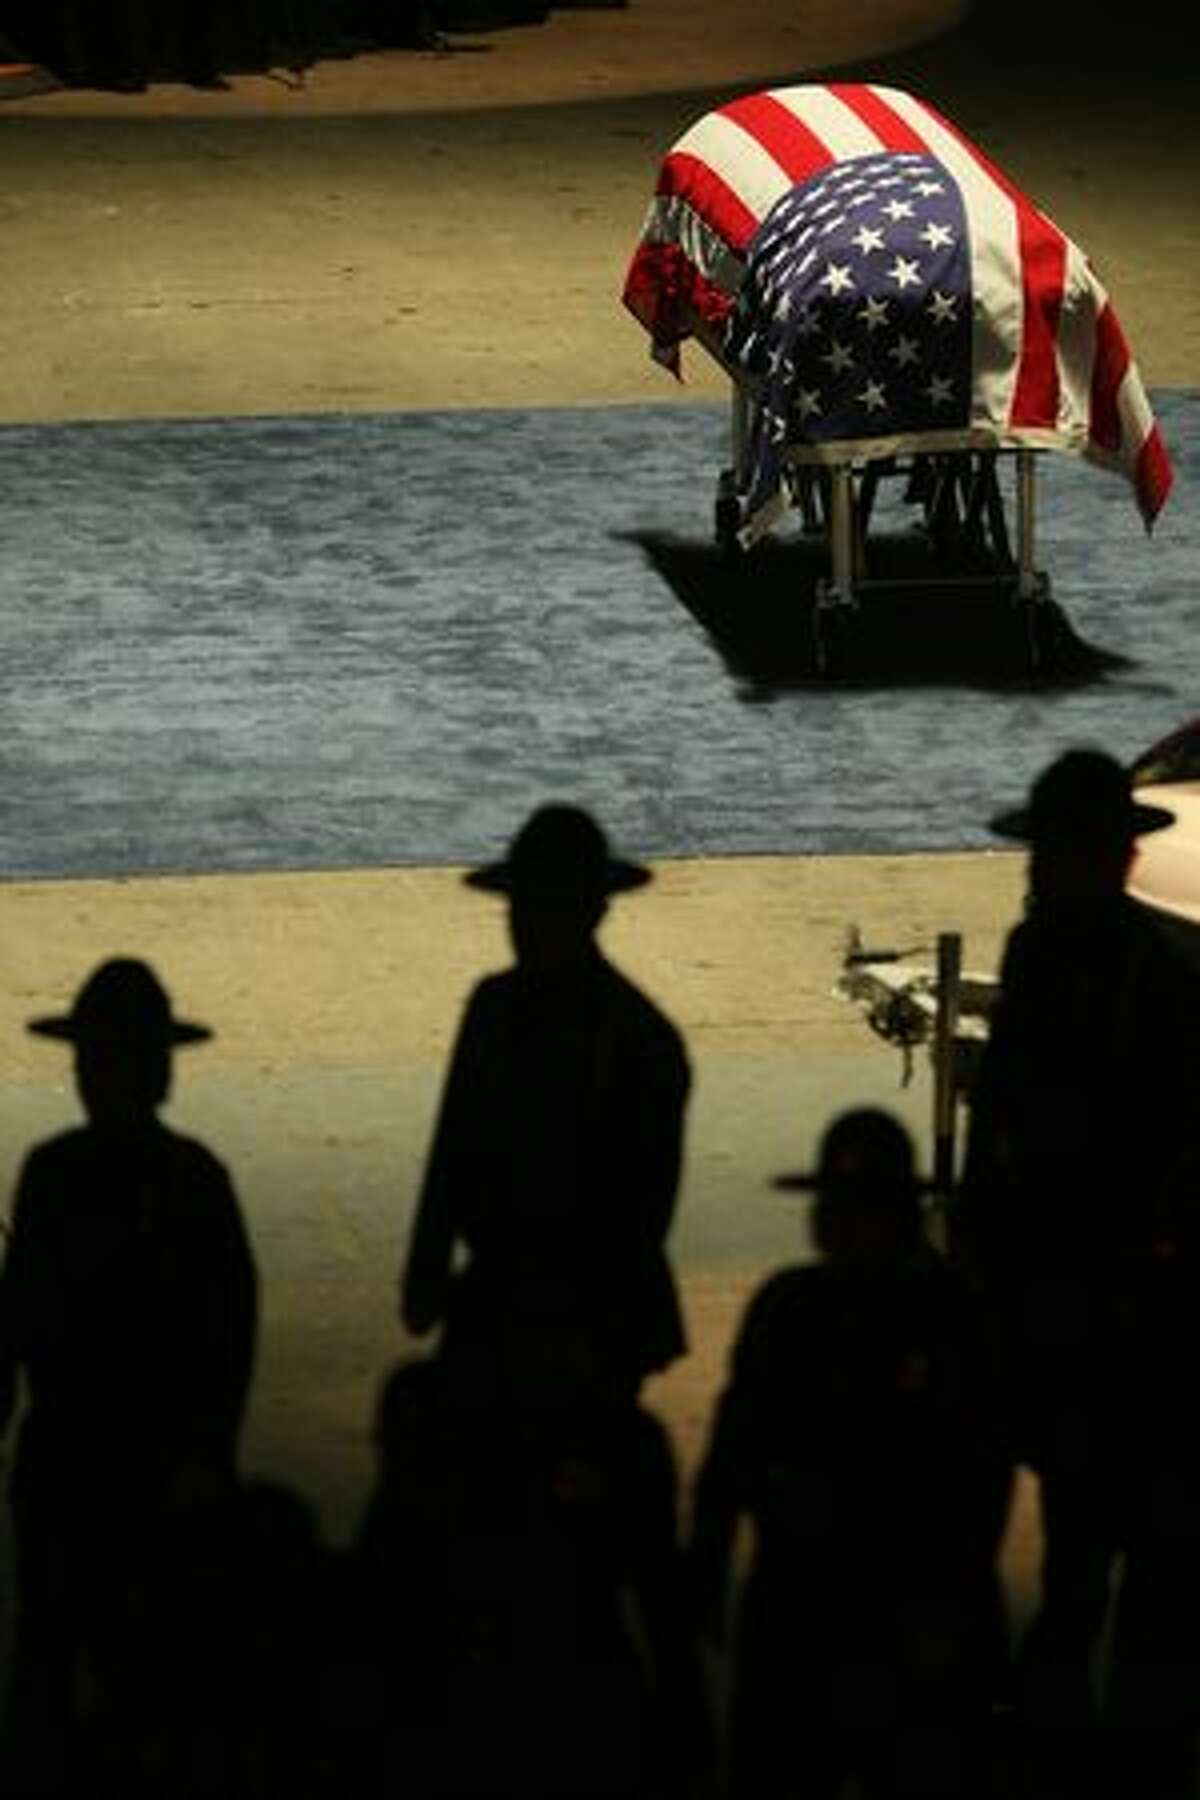 The casket sits near the stage during the memorial service for Pierce County Sheriff's Deputy Kent Mundell, Jr. at the Tacoma Dome Jan. 5, 2010.